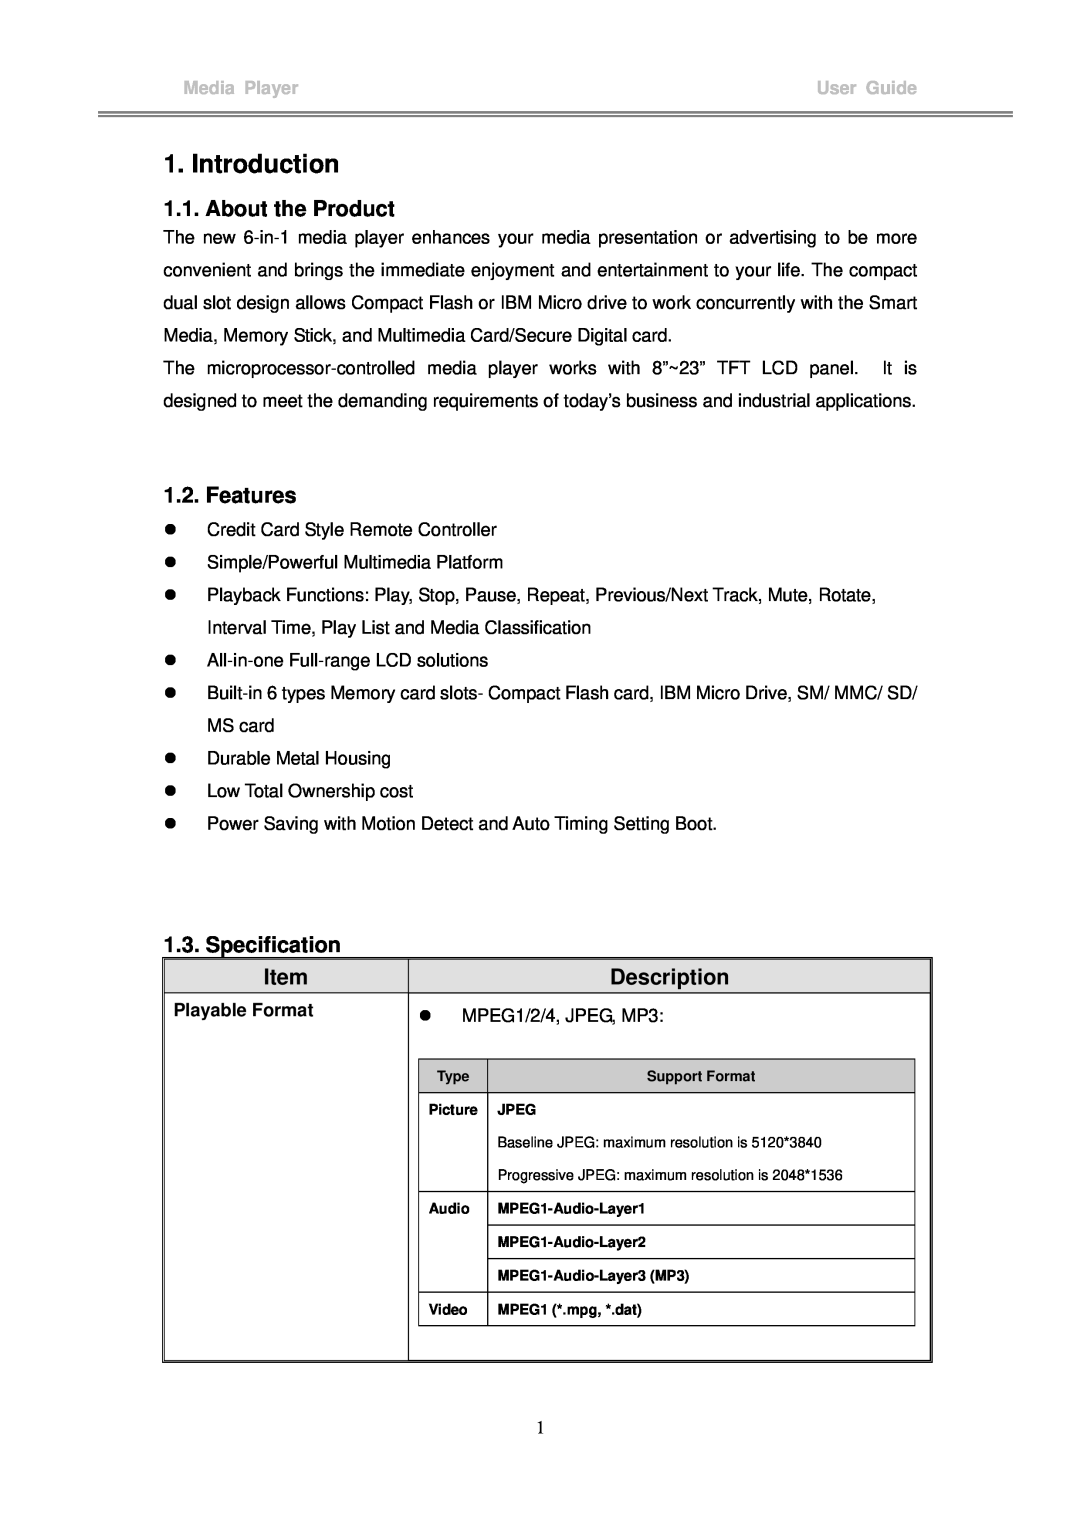 I-Tech Company MP3 Headphone manual Introduction, Media Player, User Guide, Playable Format, z MPEG1/2/4, JPEG, MP3 